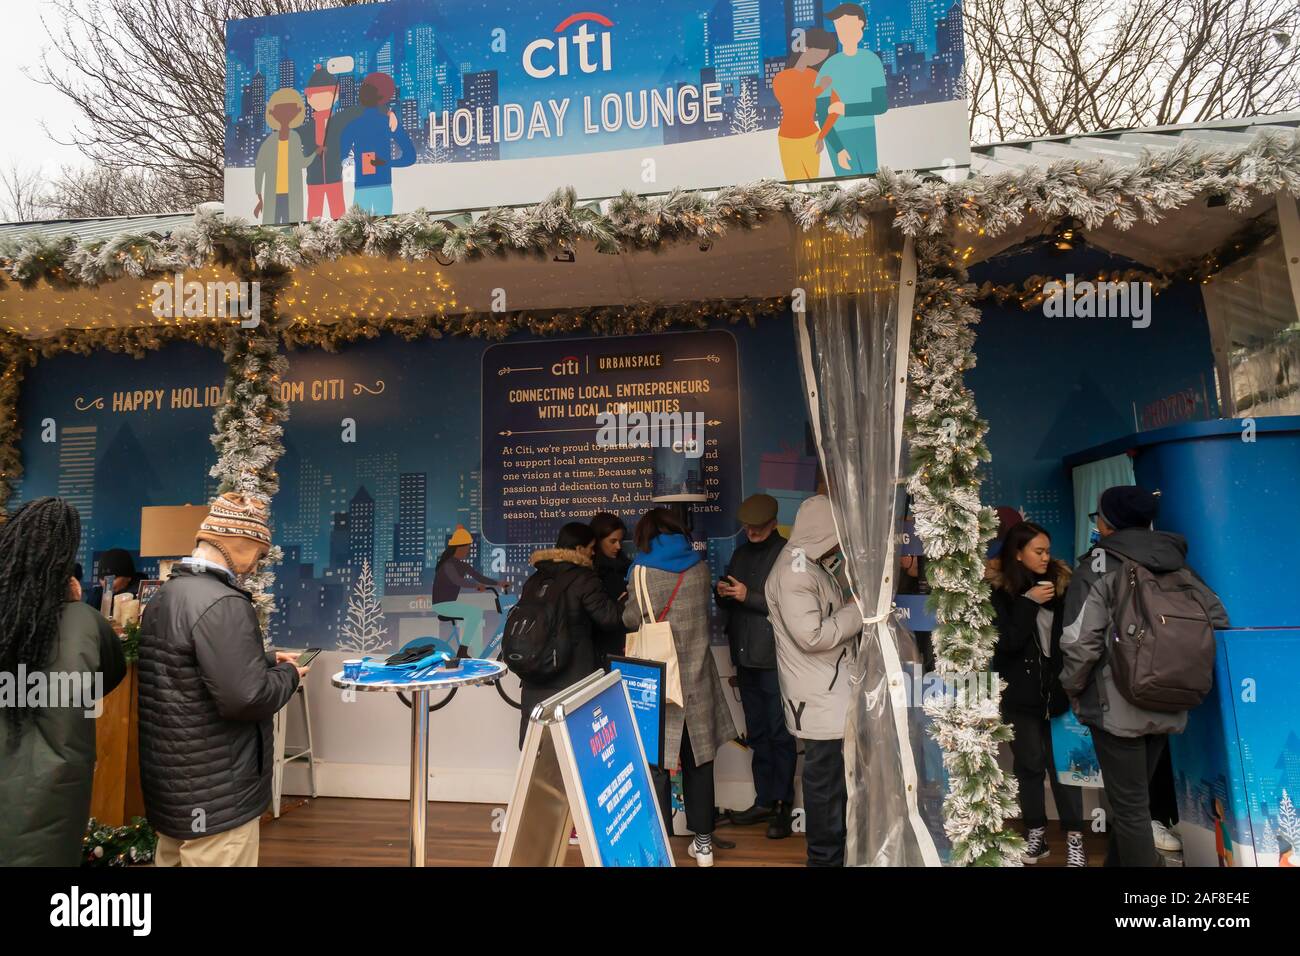 Citibank branding booth at the Union Square Holiday Market in New York on Wednesday, December 4, 2019. (© Richard B. Levine) Stock Photo